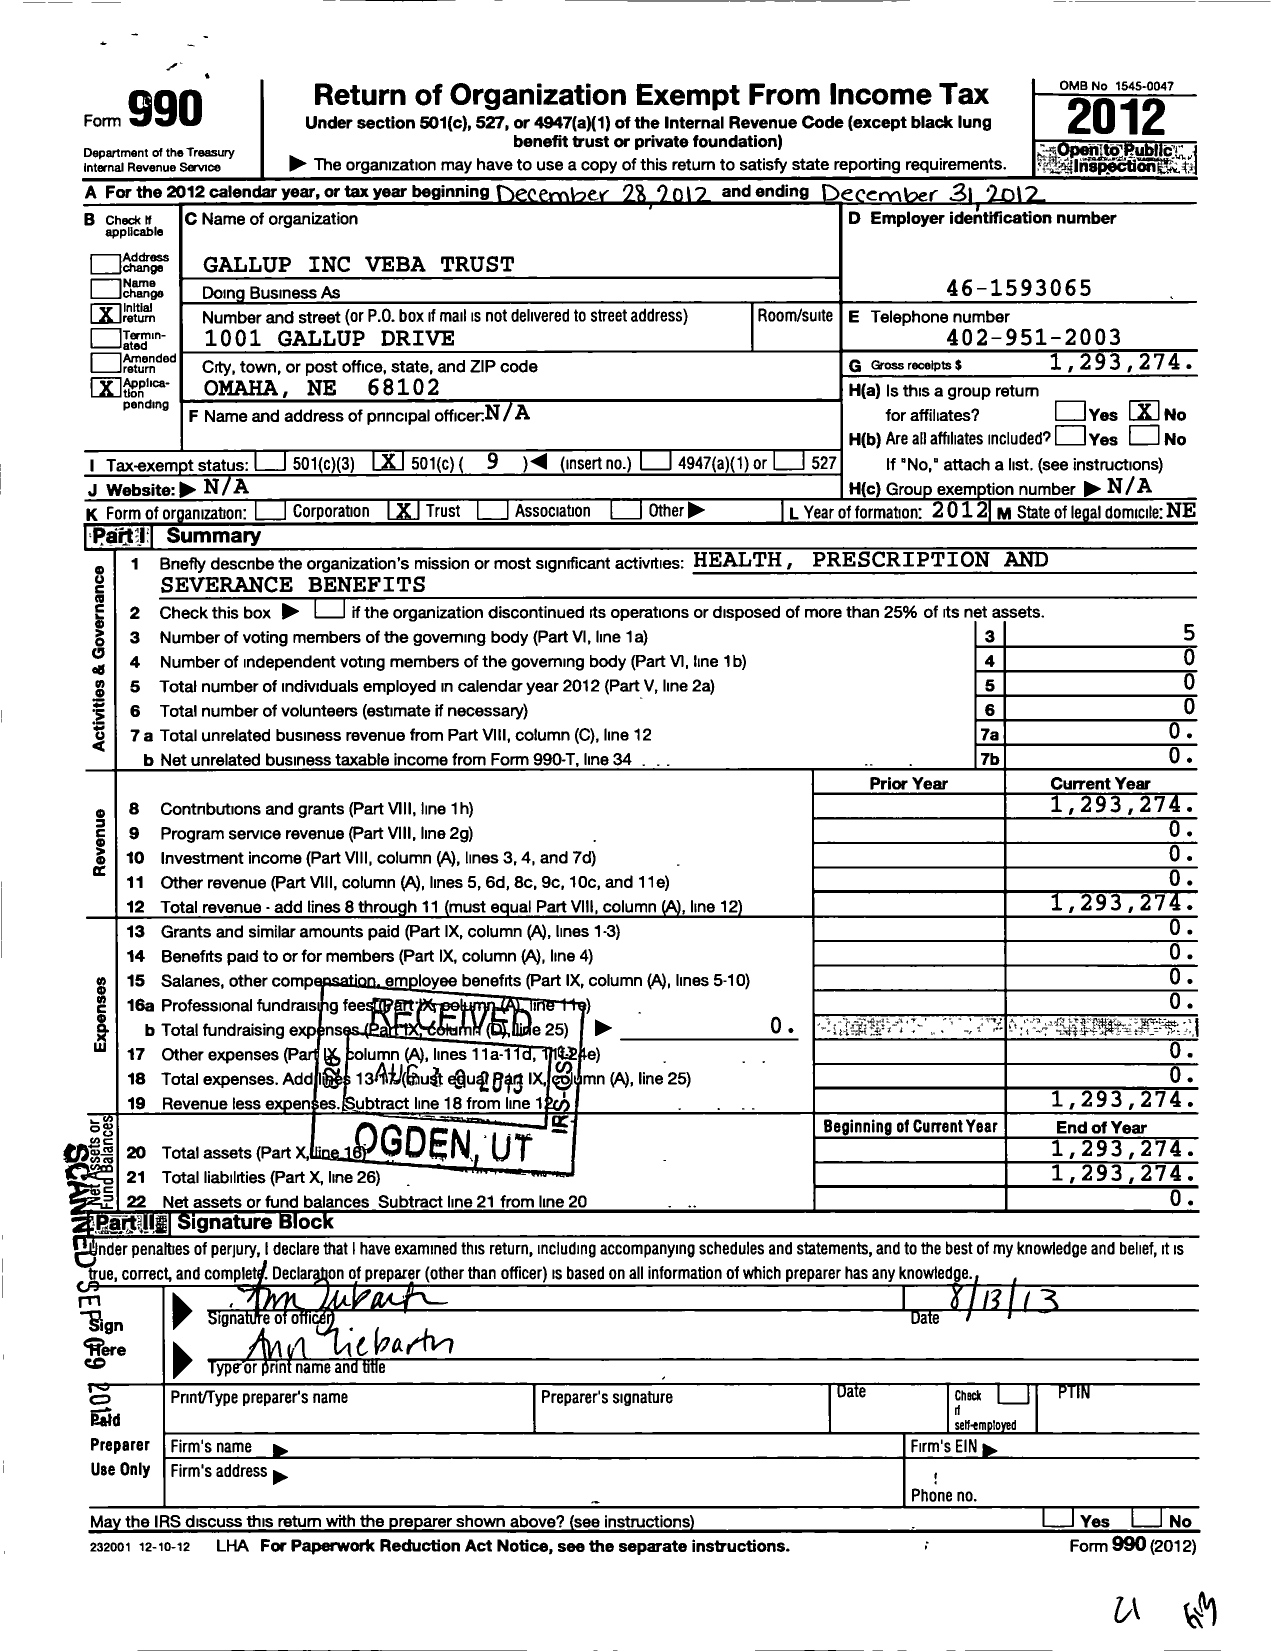 Image of first page of 2012 Form 990O for Gallup Veba Trust